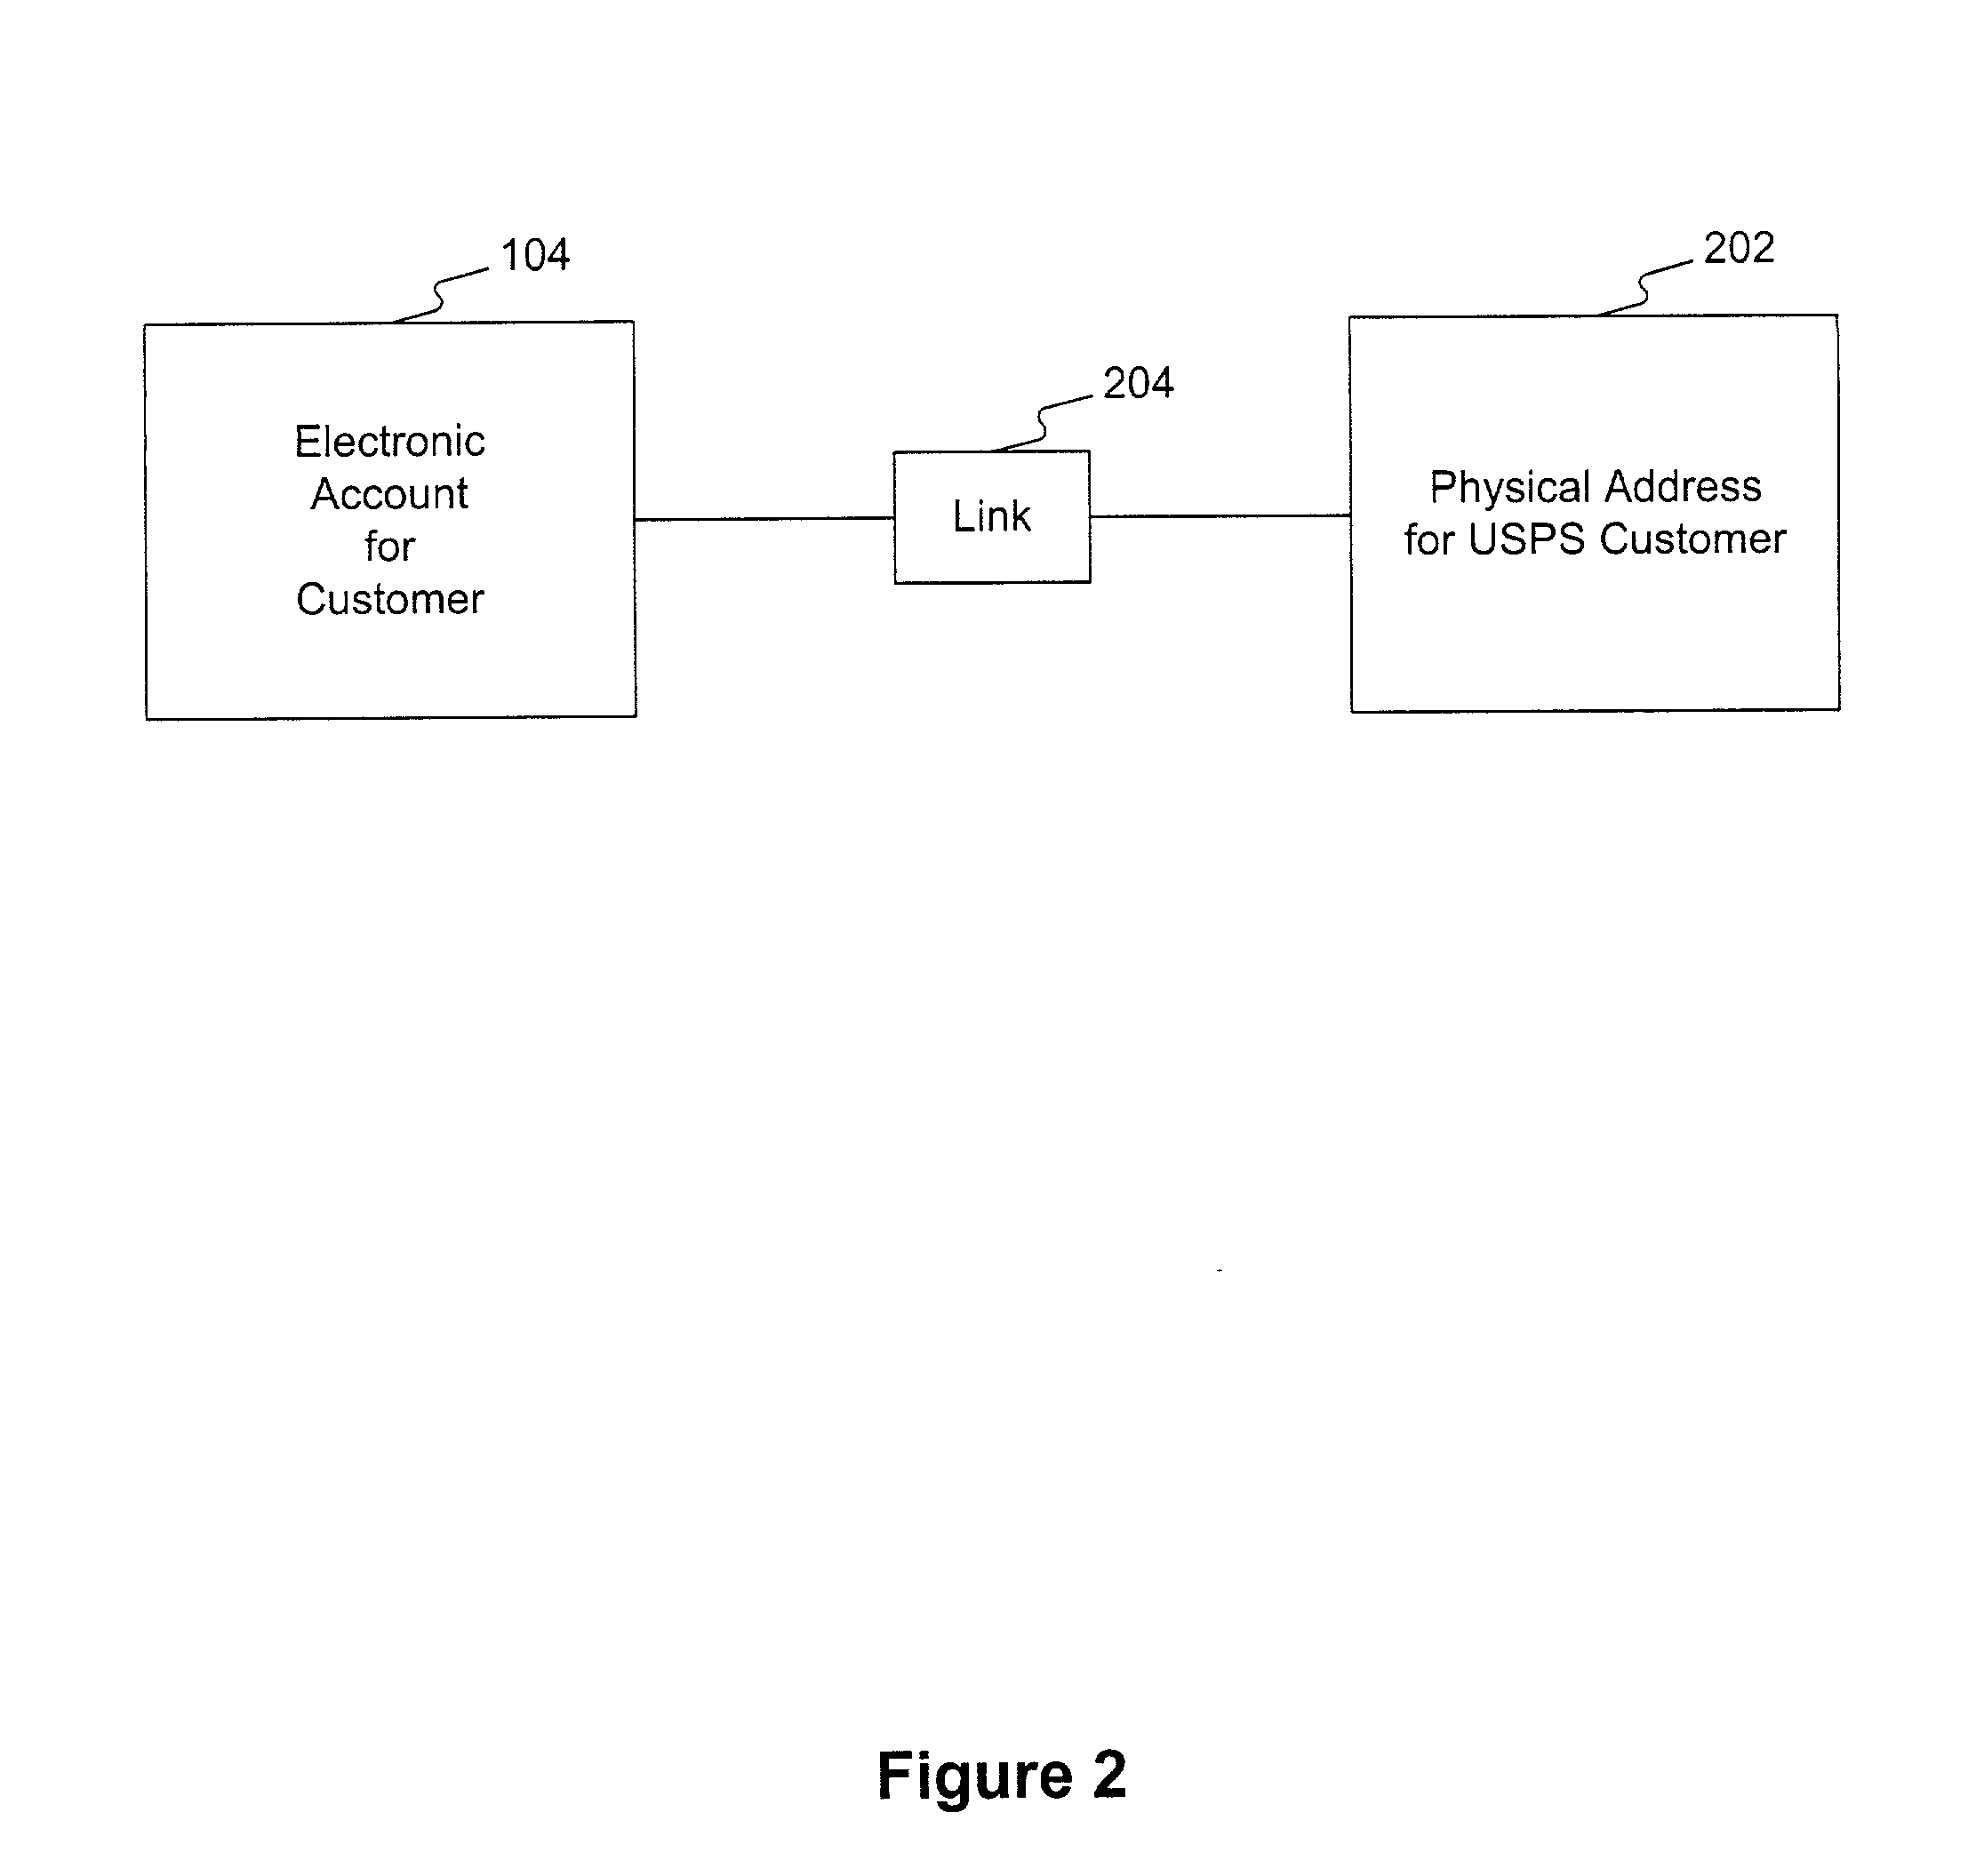 Methods and systems for linking an electronic address to a physical address of a customer